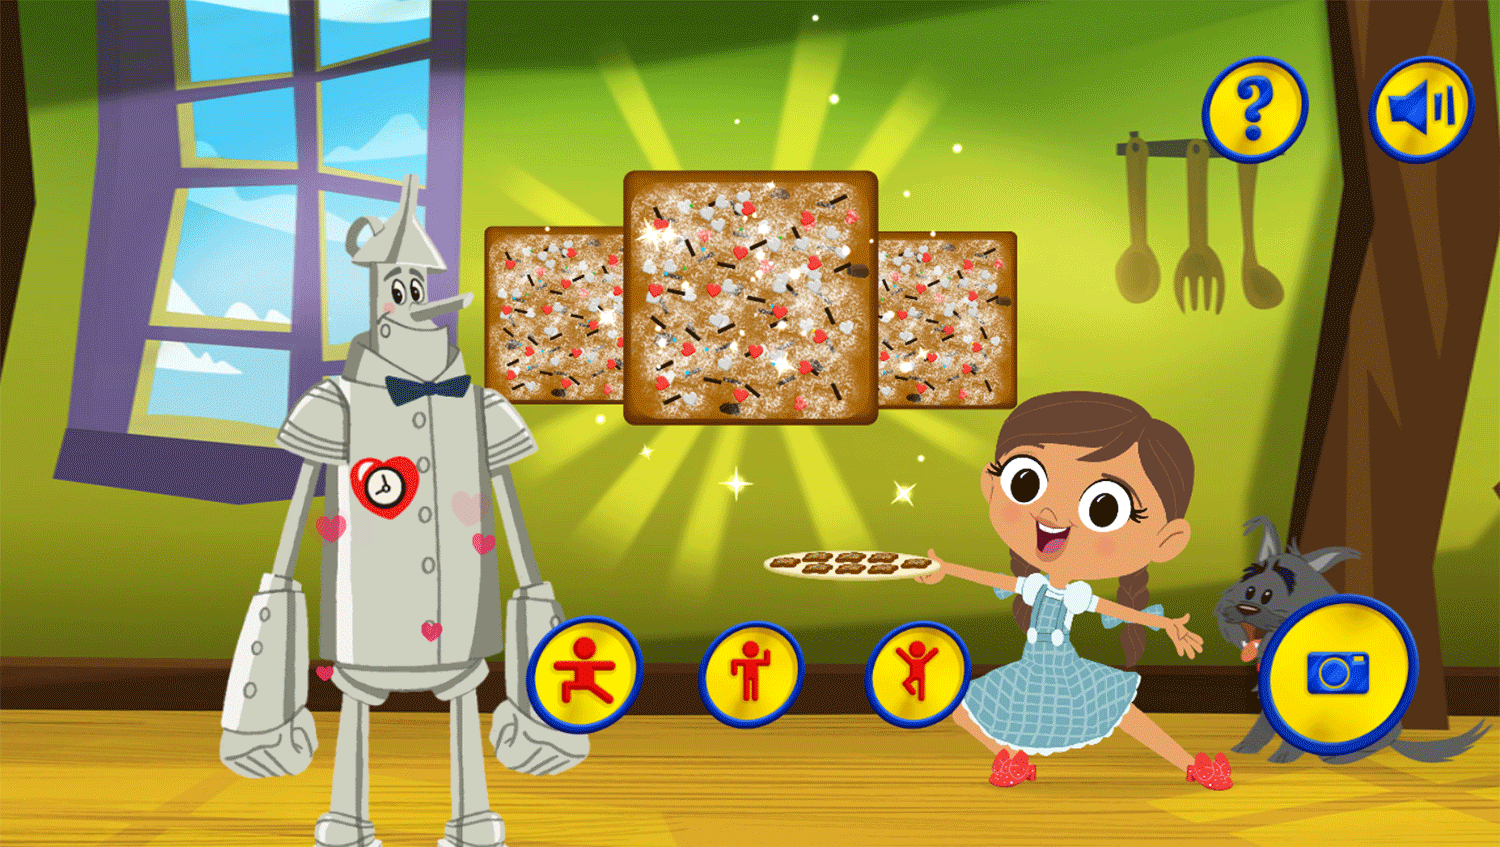 Dorothy and the Wizard of Oz Cookie Magic Game Choose Pose Screenshot.